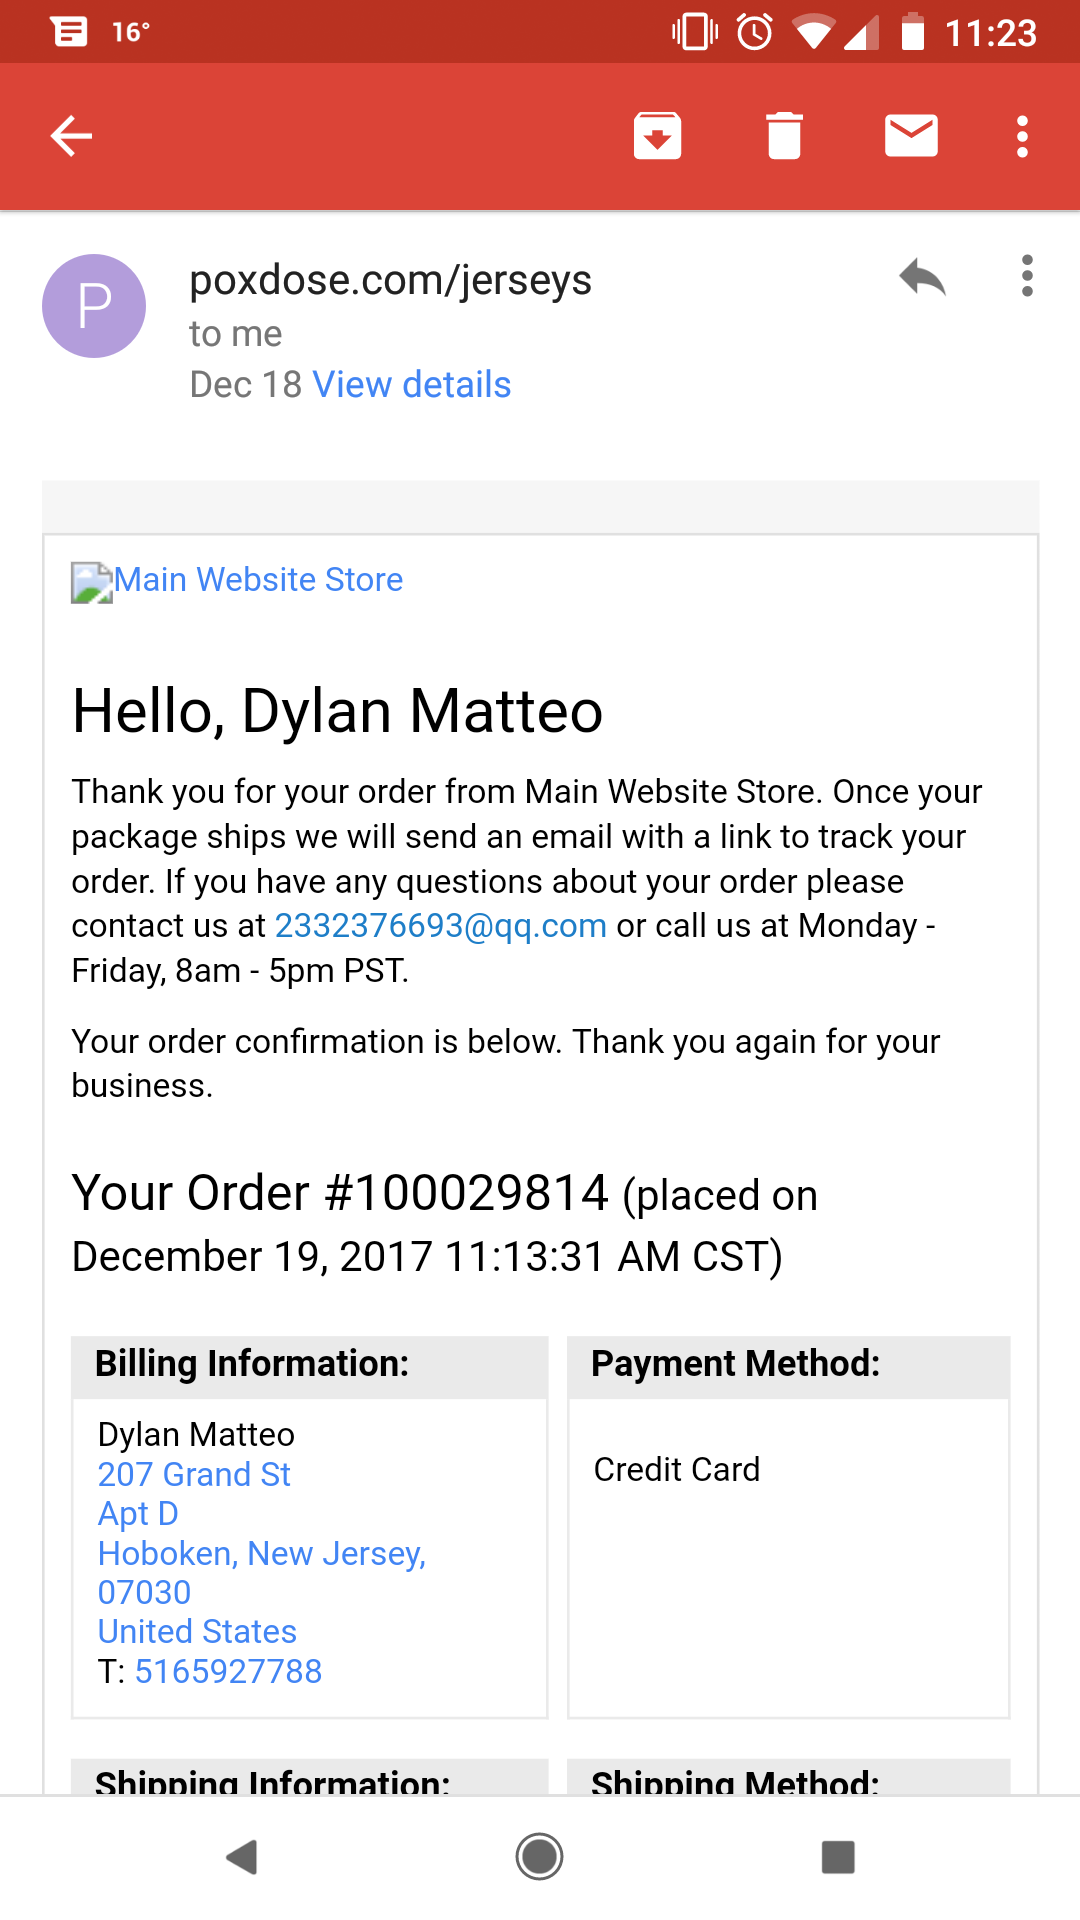 Email Received after order was placed